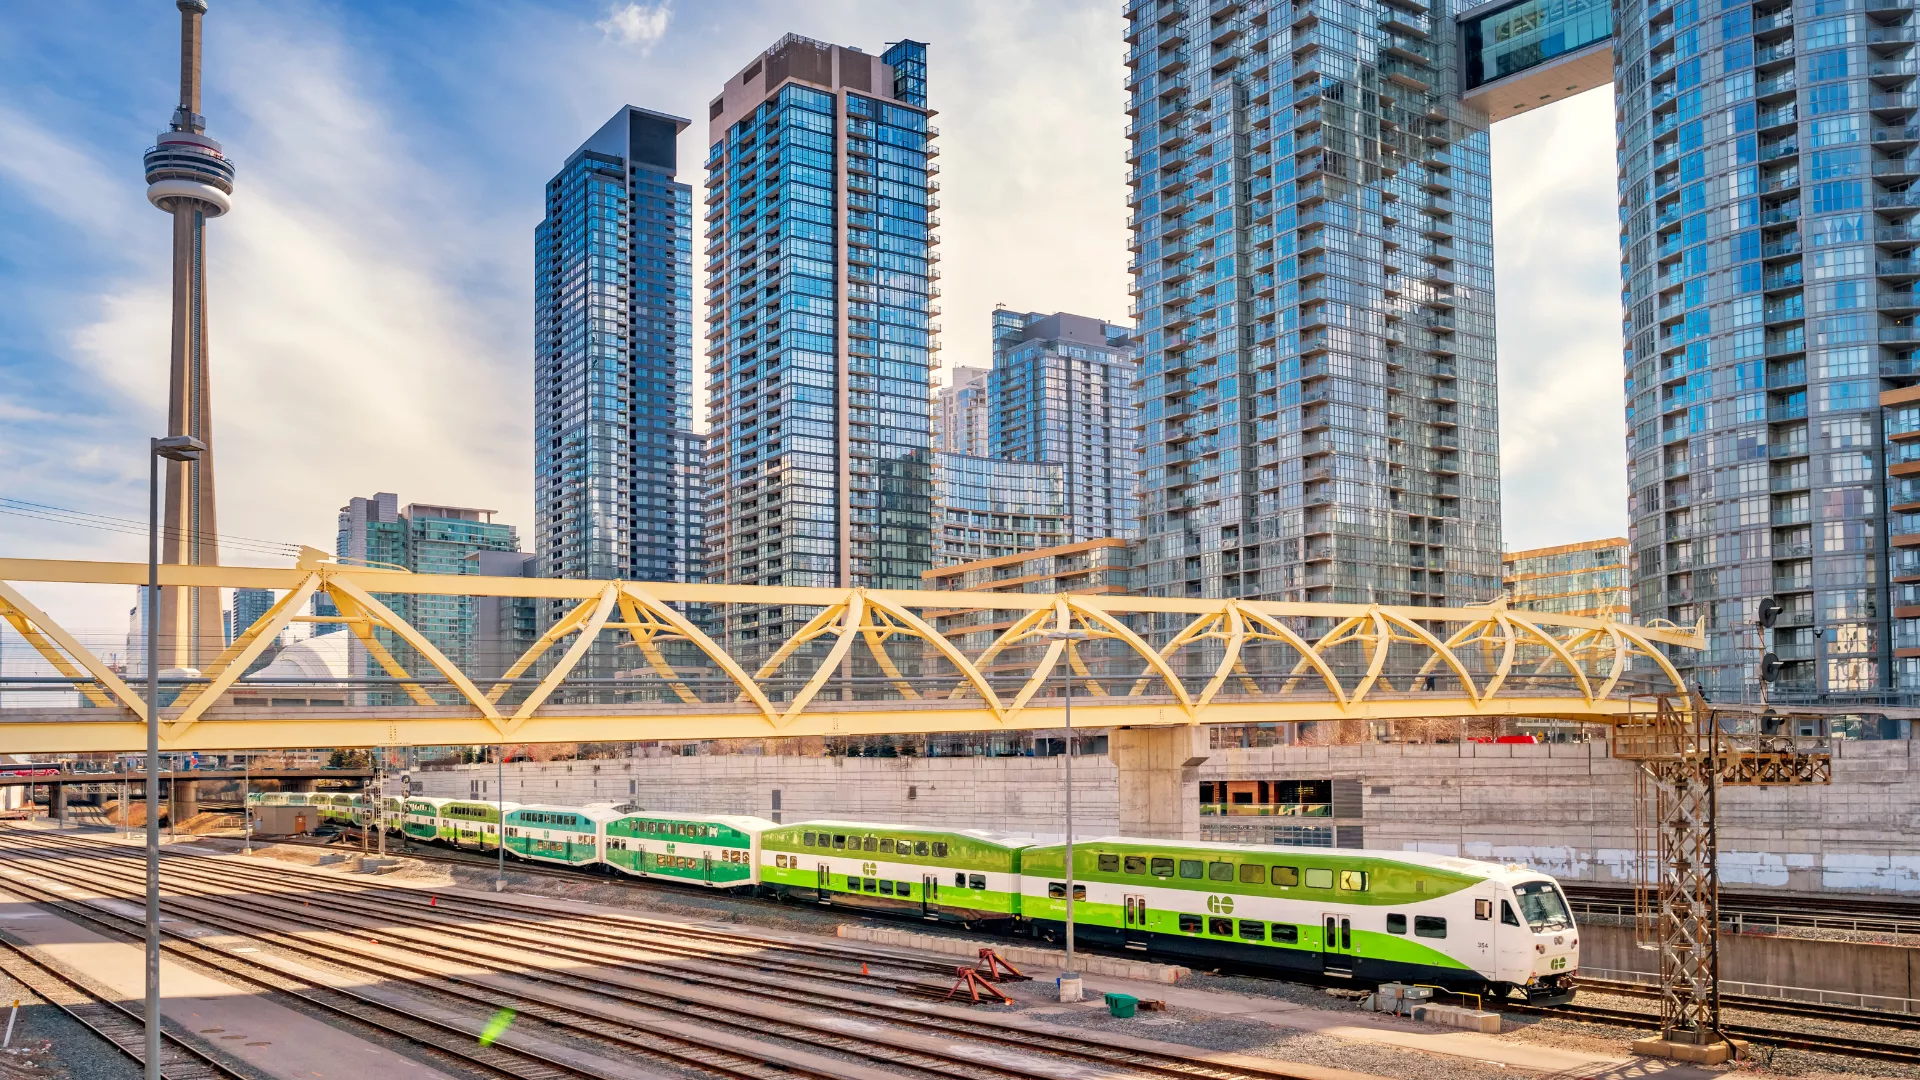 Go Train at a rail station with the Toronto skyline in the background